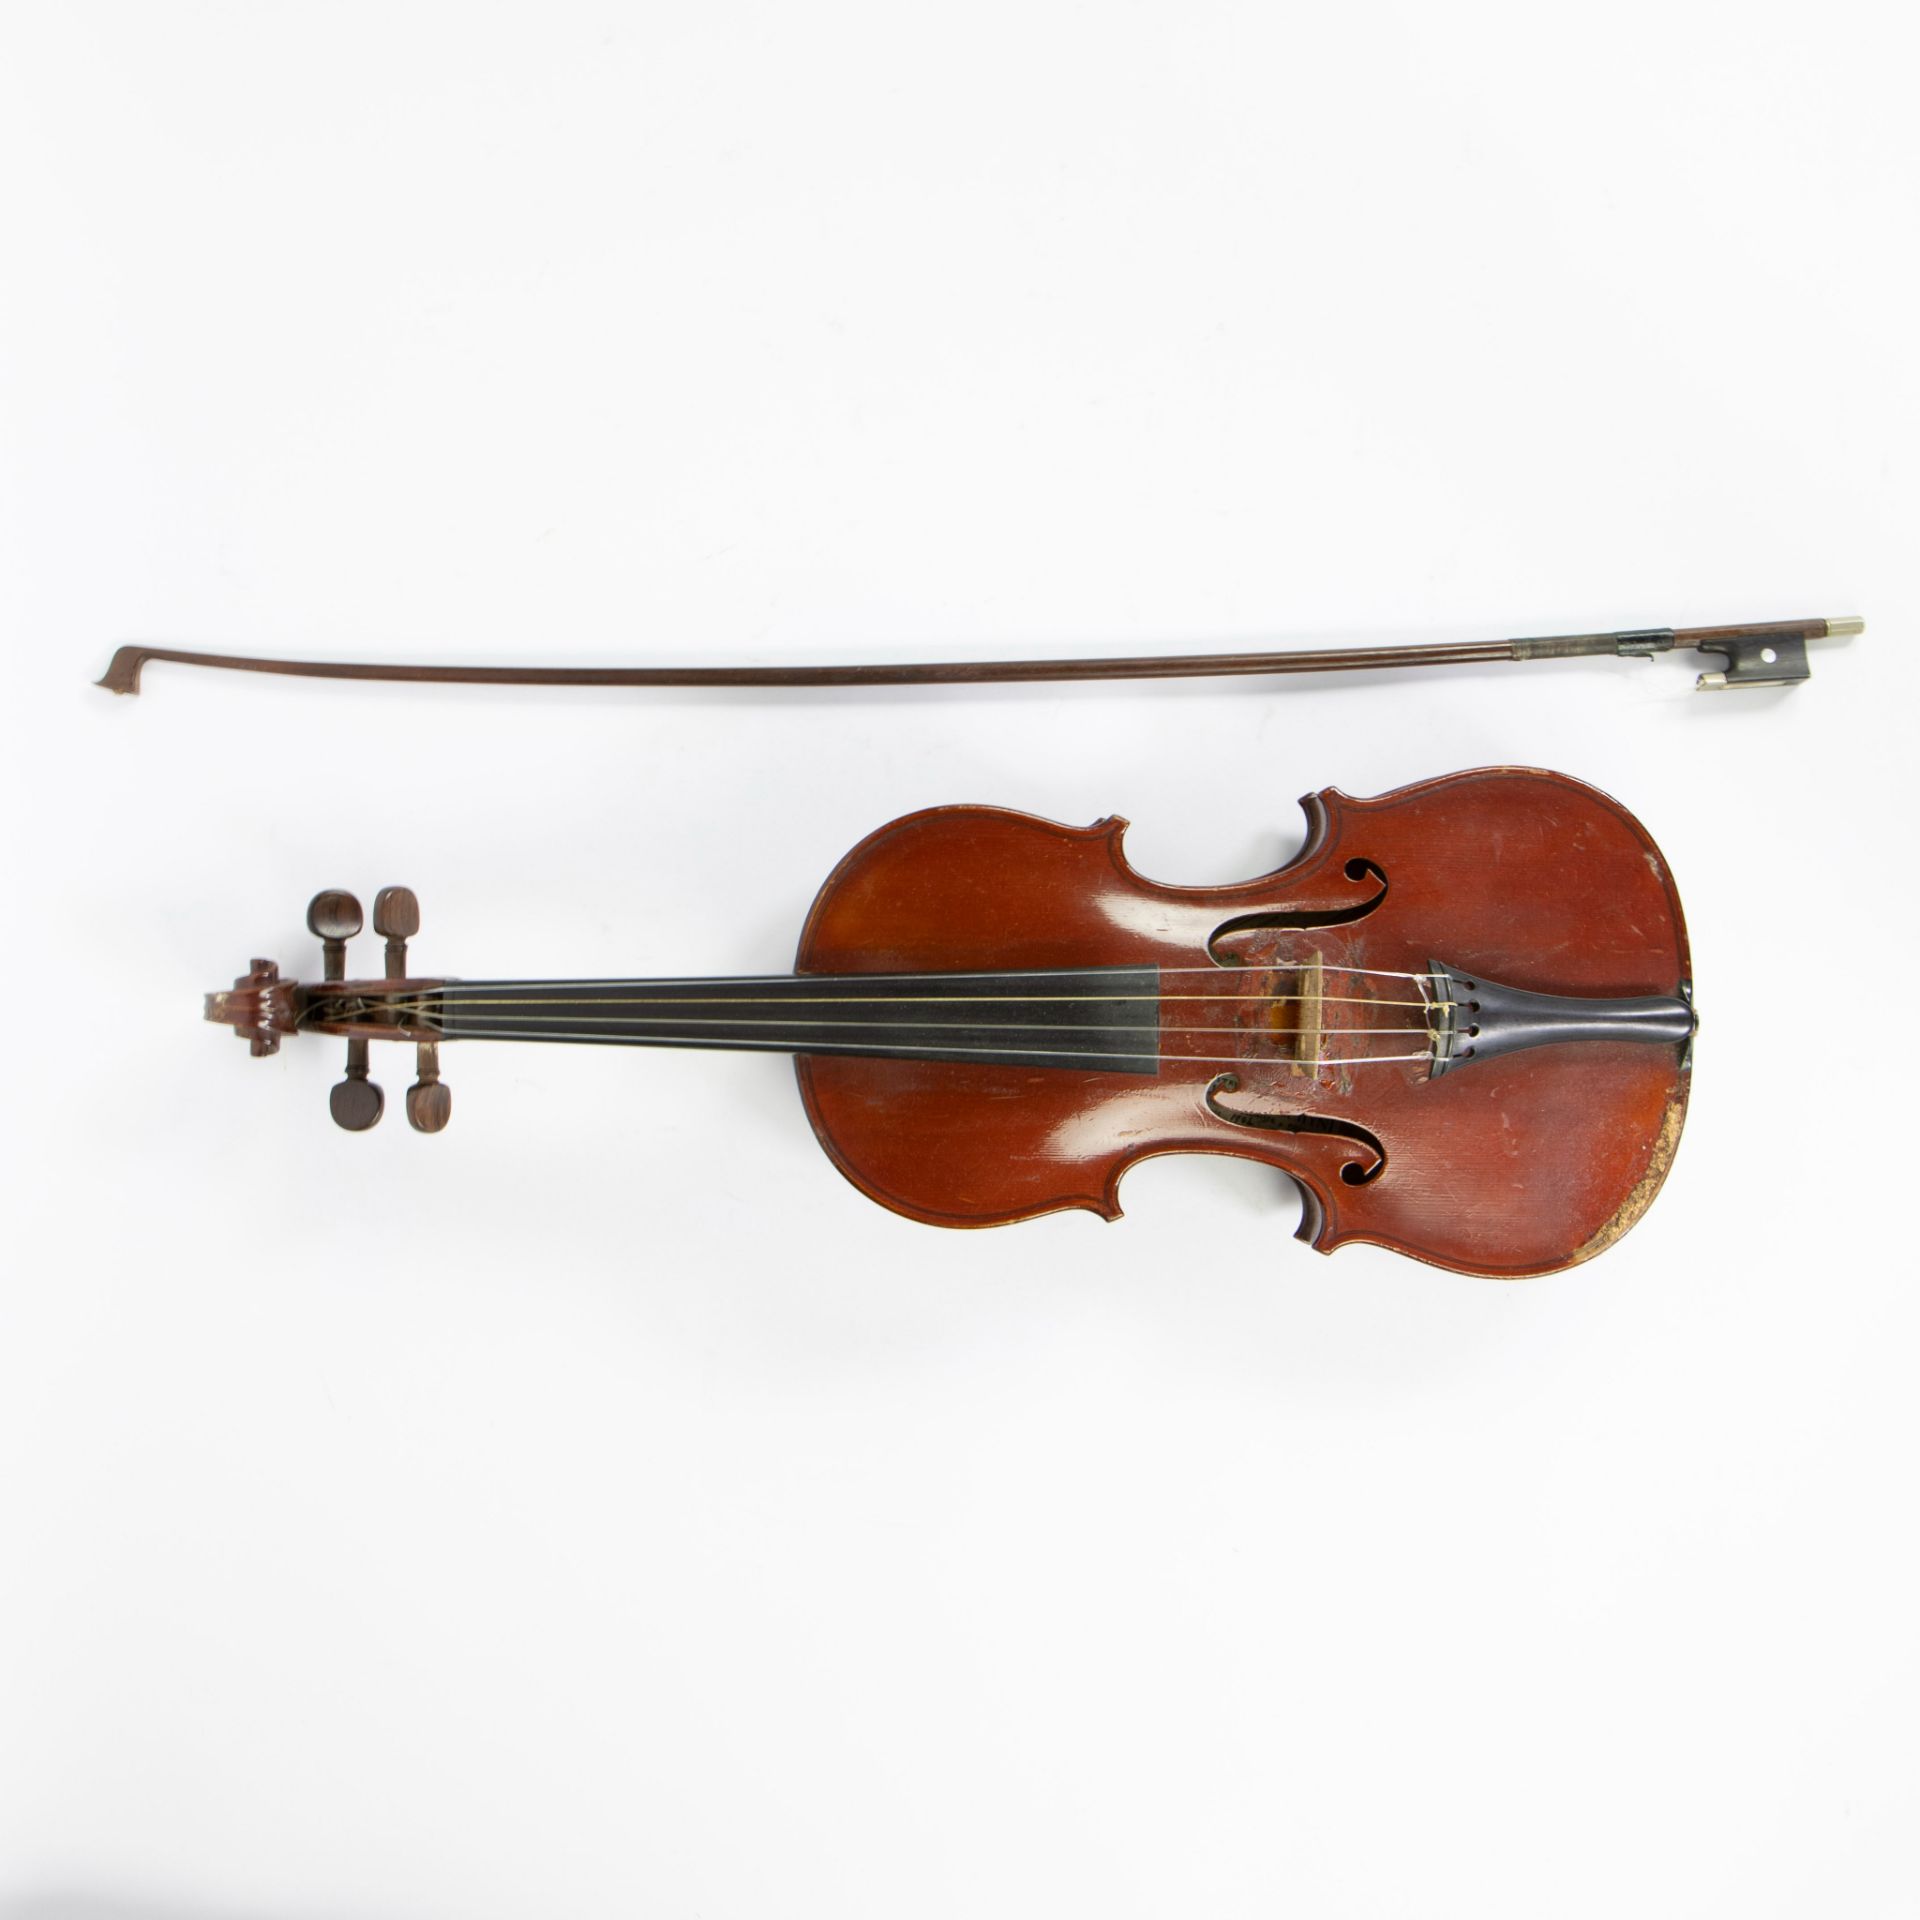 Belgian Violin handmade by Lucien Dolphyn, with violin case and bow - Image 3 of 6